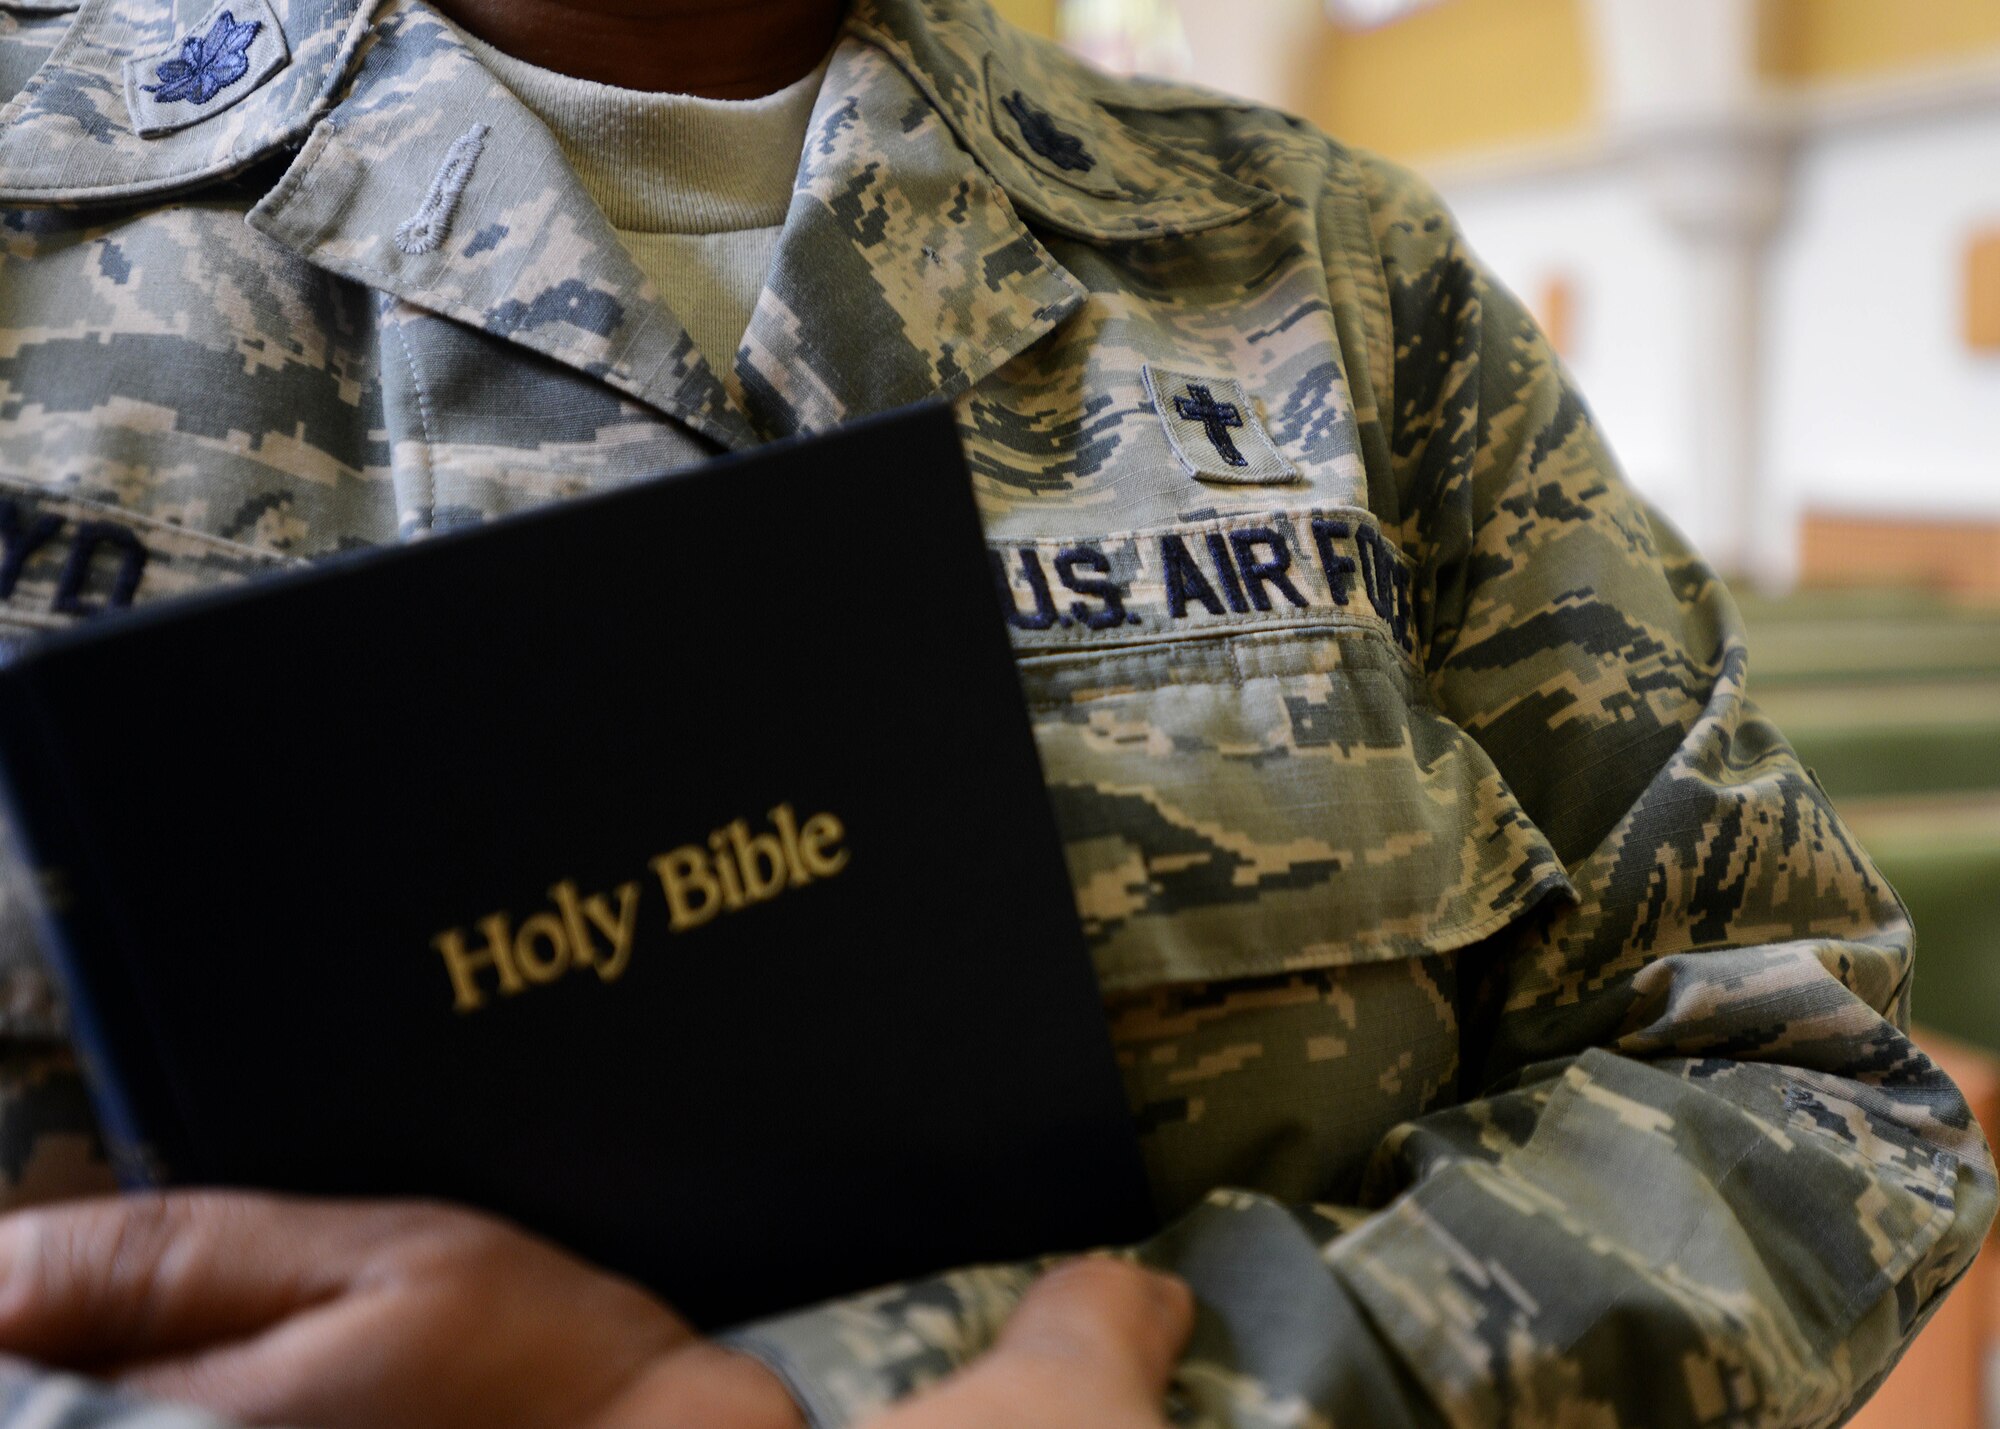 Chaplain (Lt. Col.) Donnette Boyd wears the patch of a Christian cross on her uniform to identify her as a chaplain Aug. 18, 2014, at Aviano Air Base, Italy. During her upbringing, religion and church were not a part of her daily life; however, she became a strong believer after discovering how to pray on her own. Boyd is now a 31st Fighter Wing chaplain. (U.S. Air Force photo/Airman 1st Class Deana Heitzman)